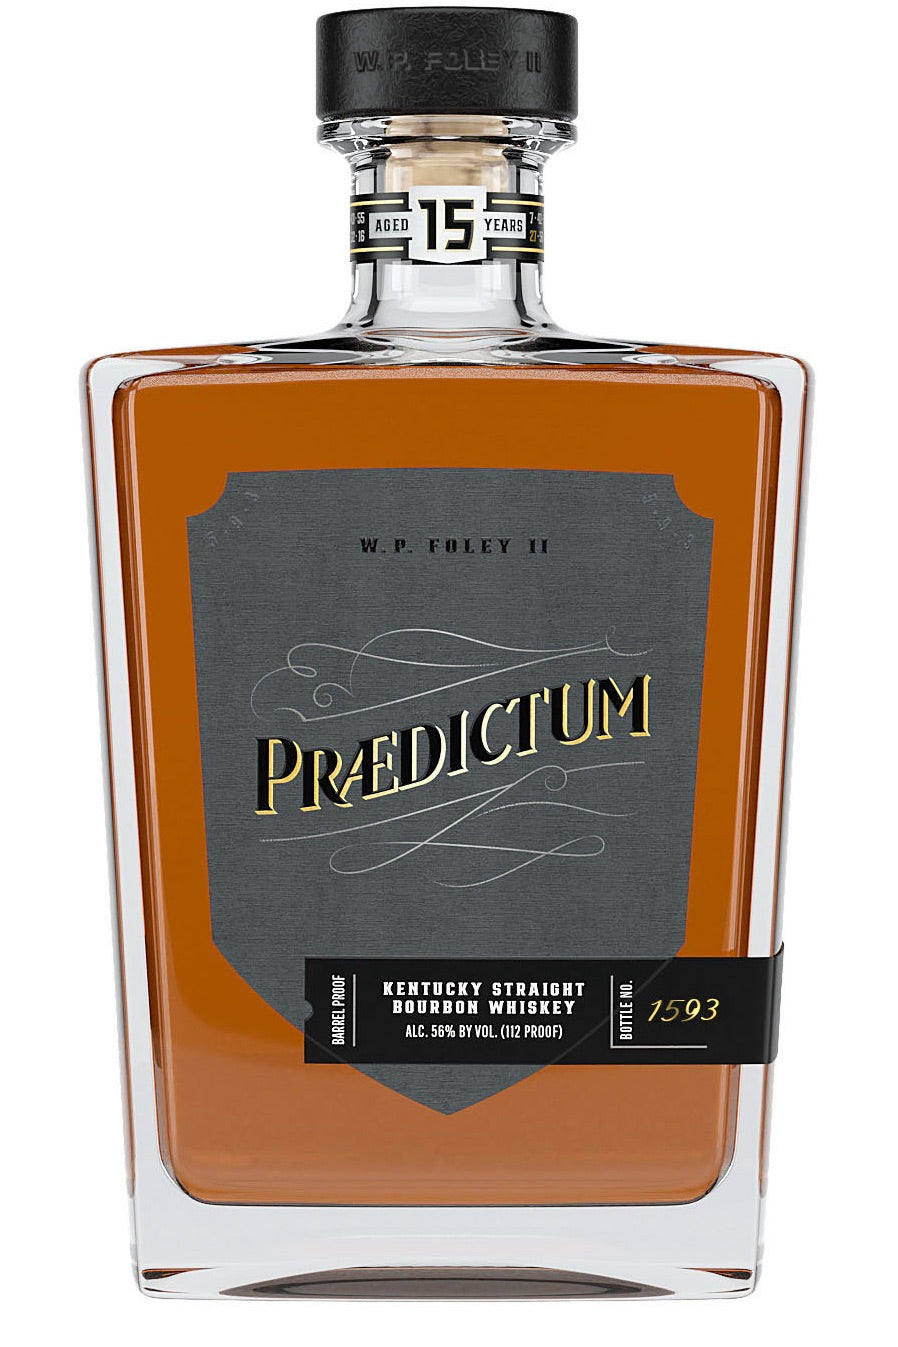 Bottle Proof  Hand crafted cocktails made for the hospitality industry